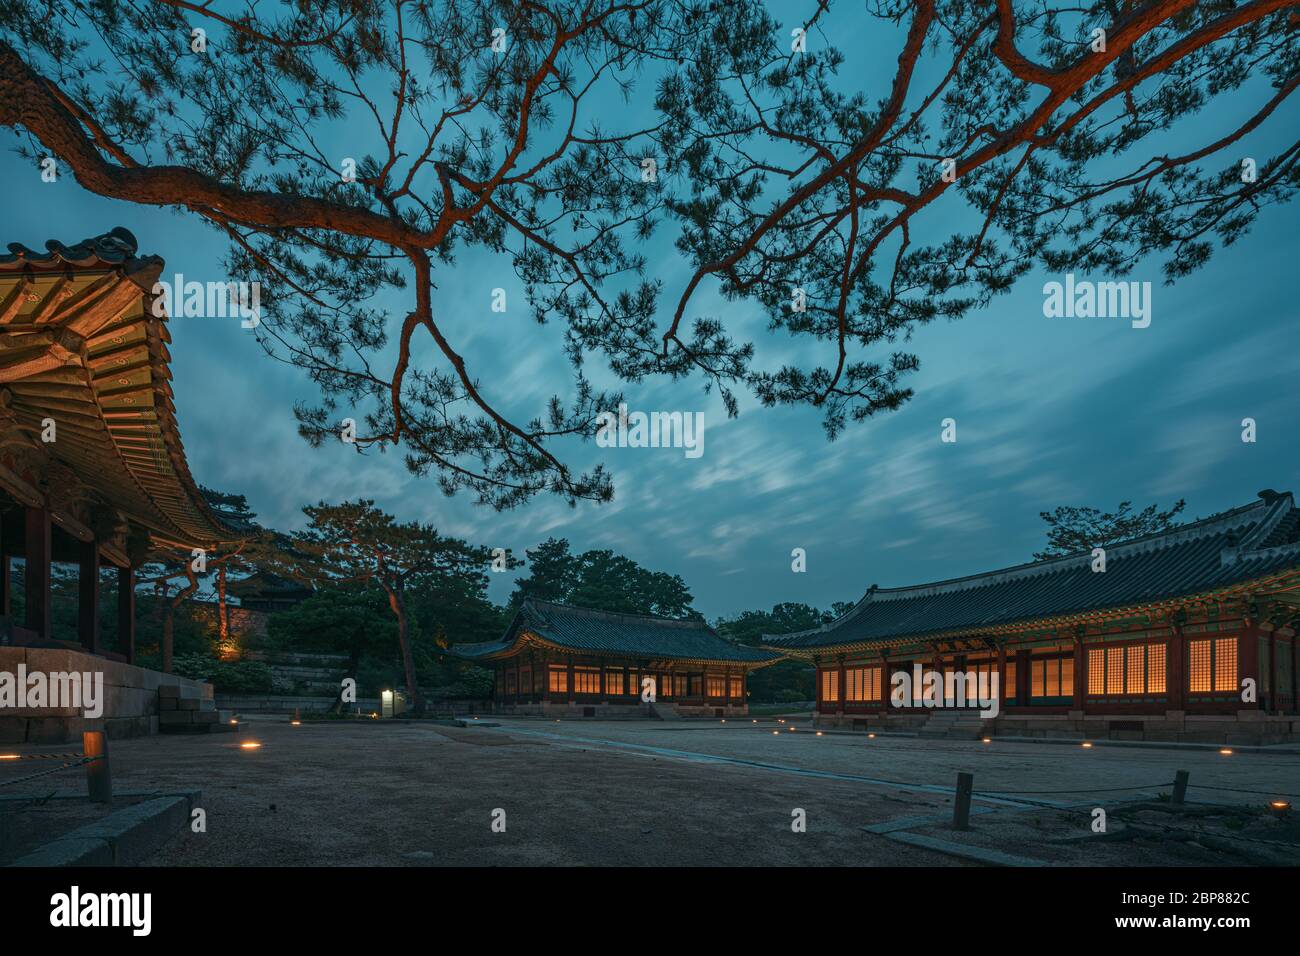 Seoul, South Korea - 17 May 2020: Changgyeonggung is one of the only palaces in Korea that offer regular night hours.  Lit up wonderfully at night, th Stock Photo